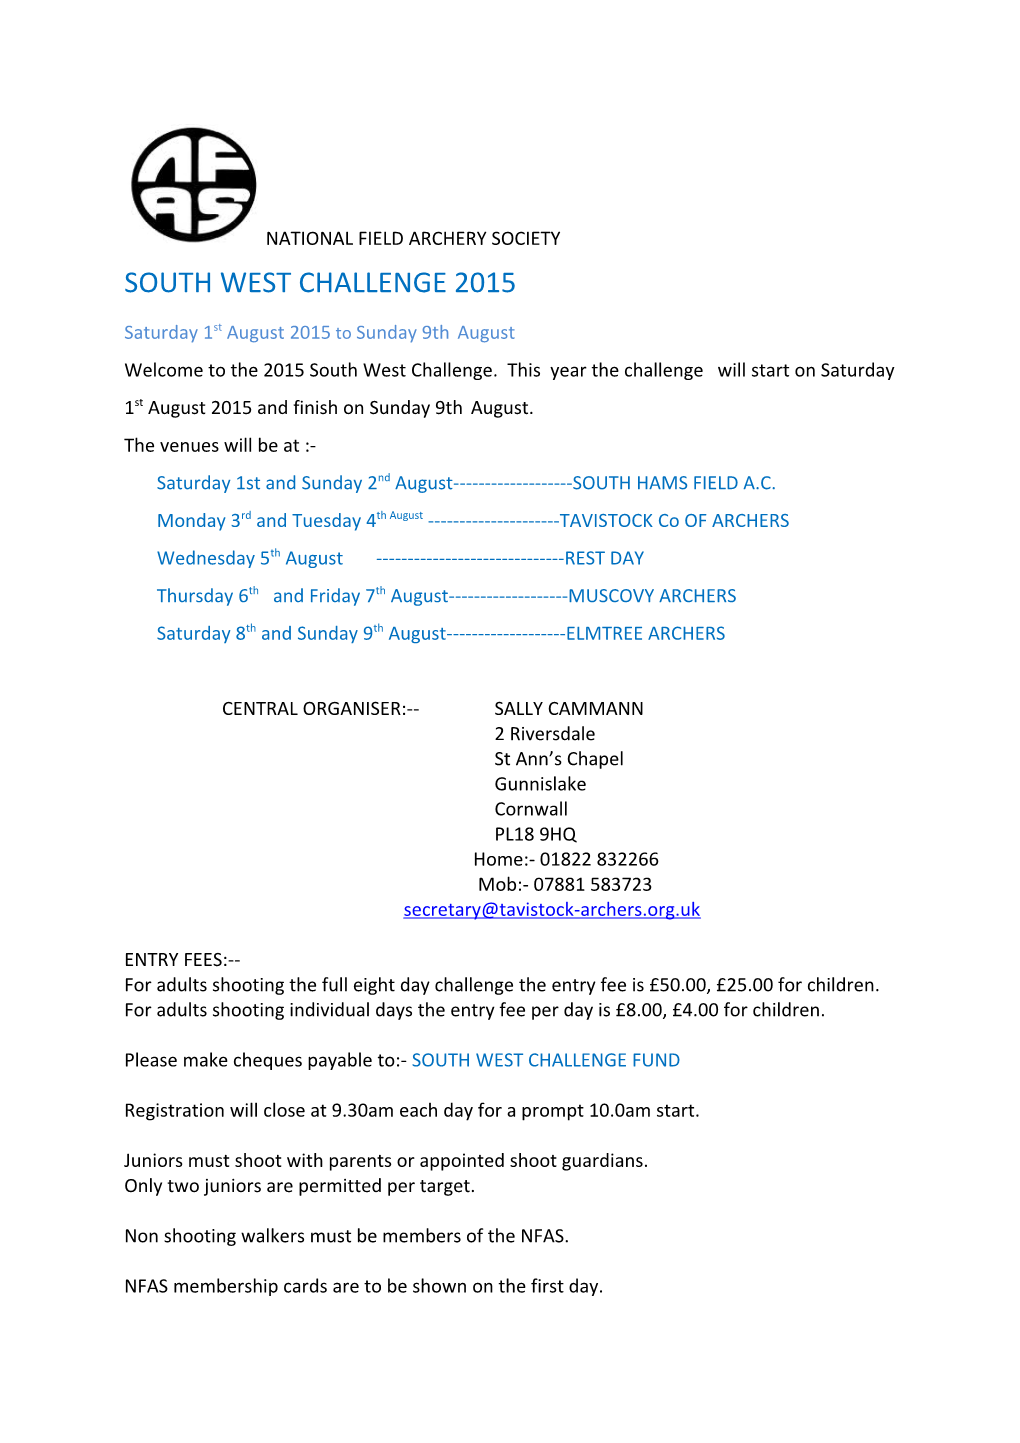 South West Challenge 2015